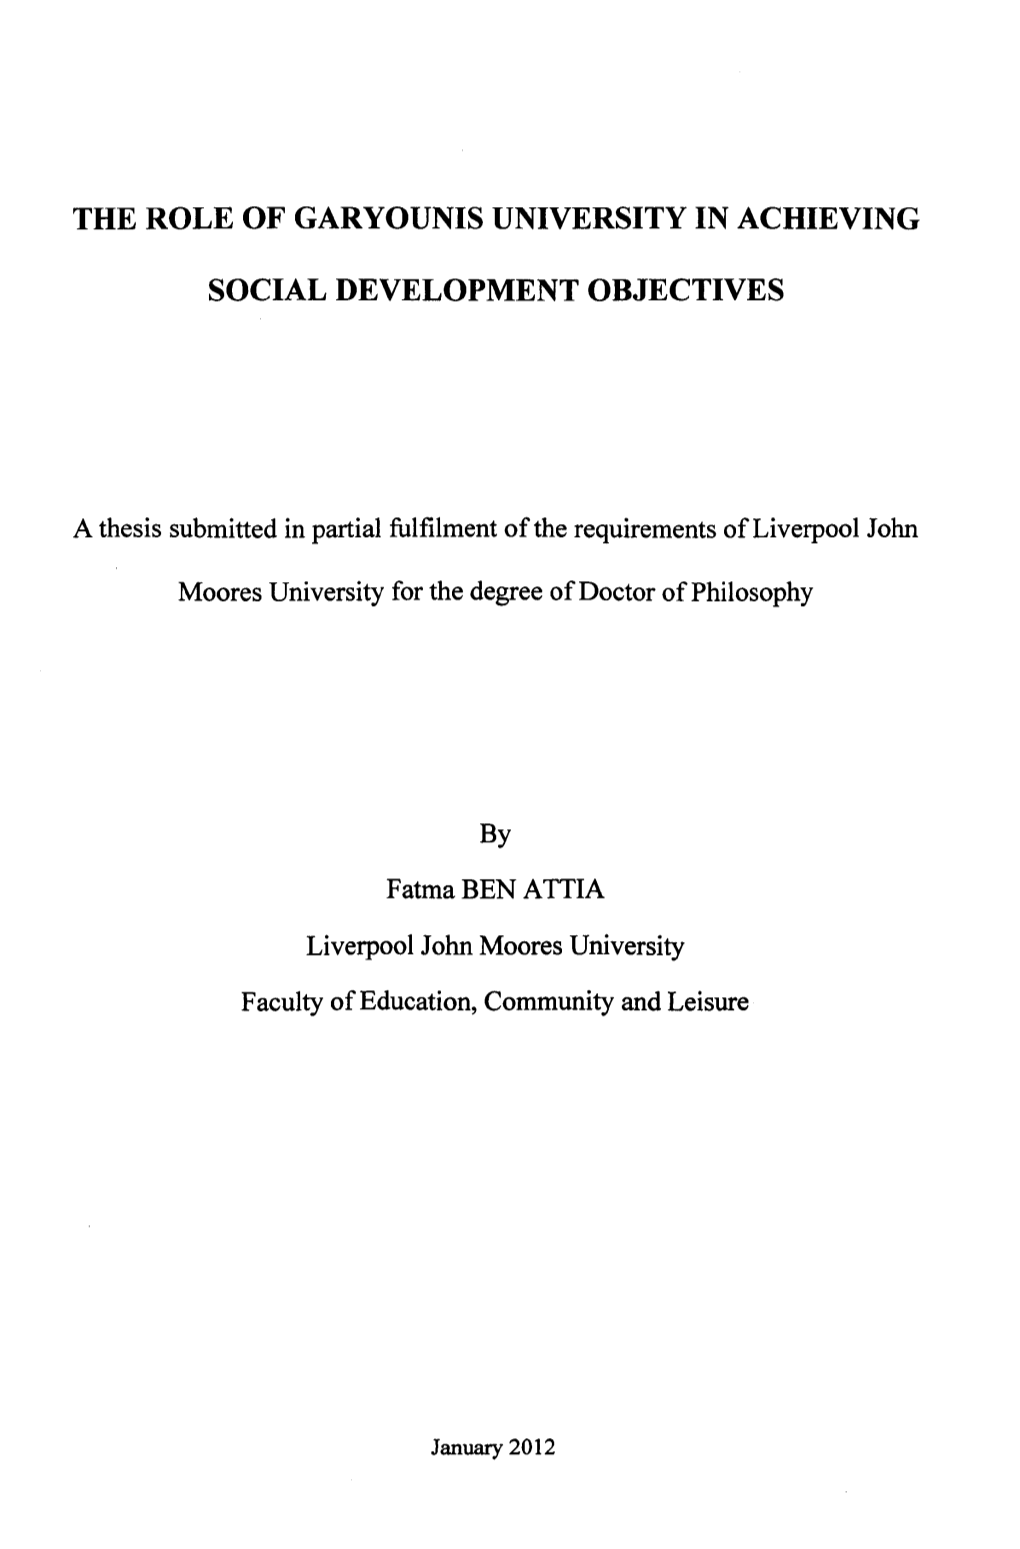 The Role of Garyounis University in Achieving Social Development Objectives Based on the Staff Point of View"